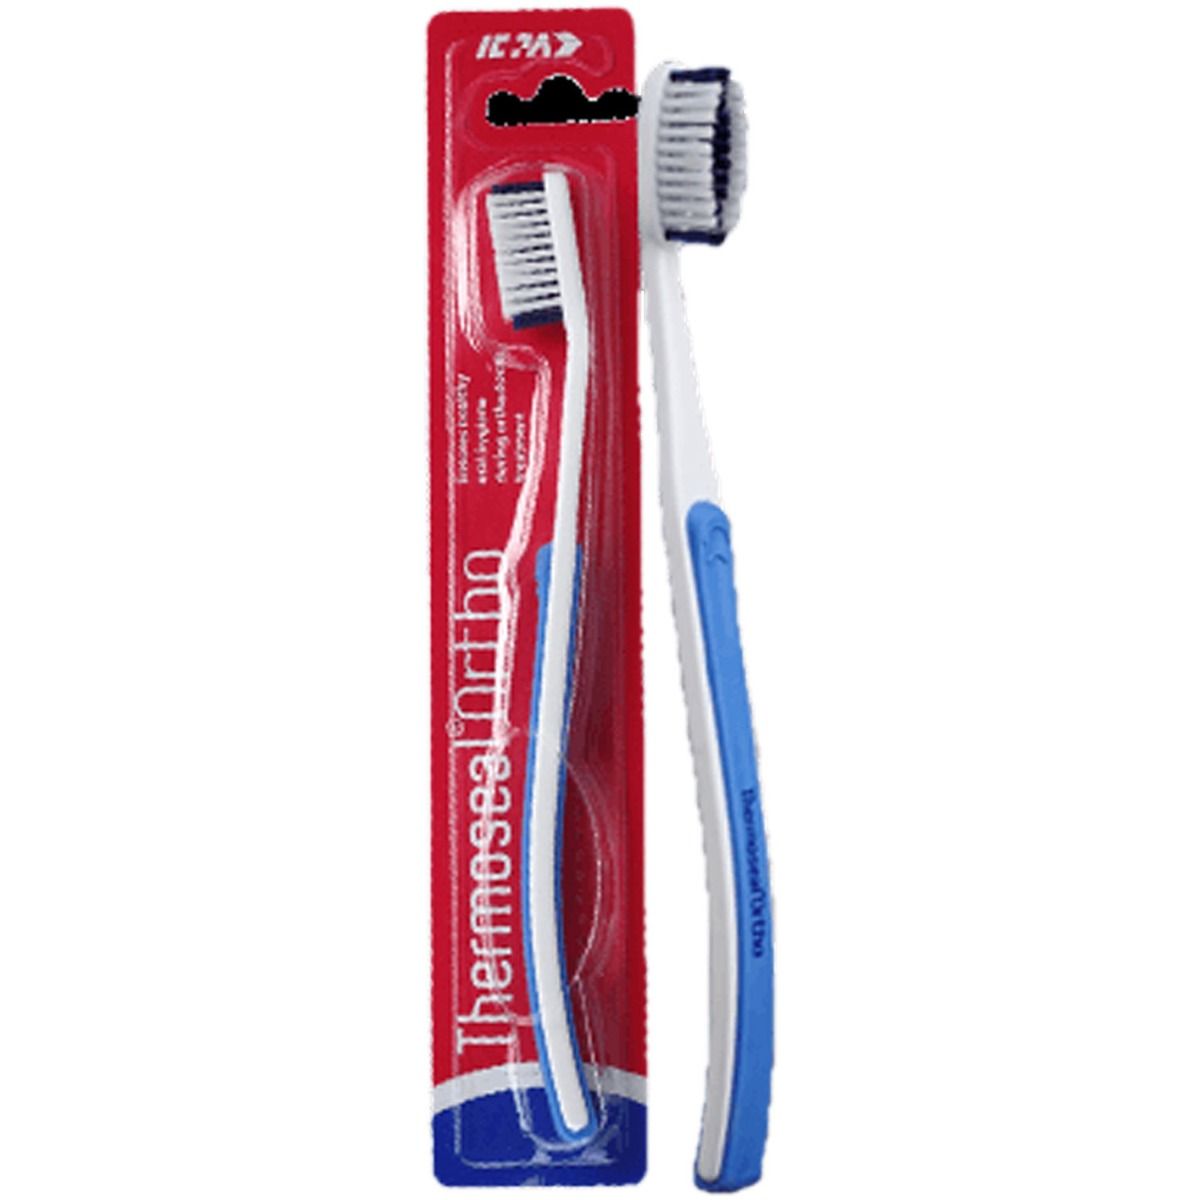 Buy Thermoseal Ortho Toothbrush, 1 Count Online